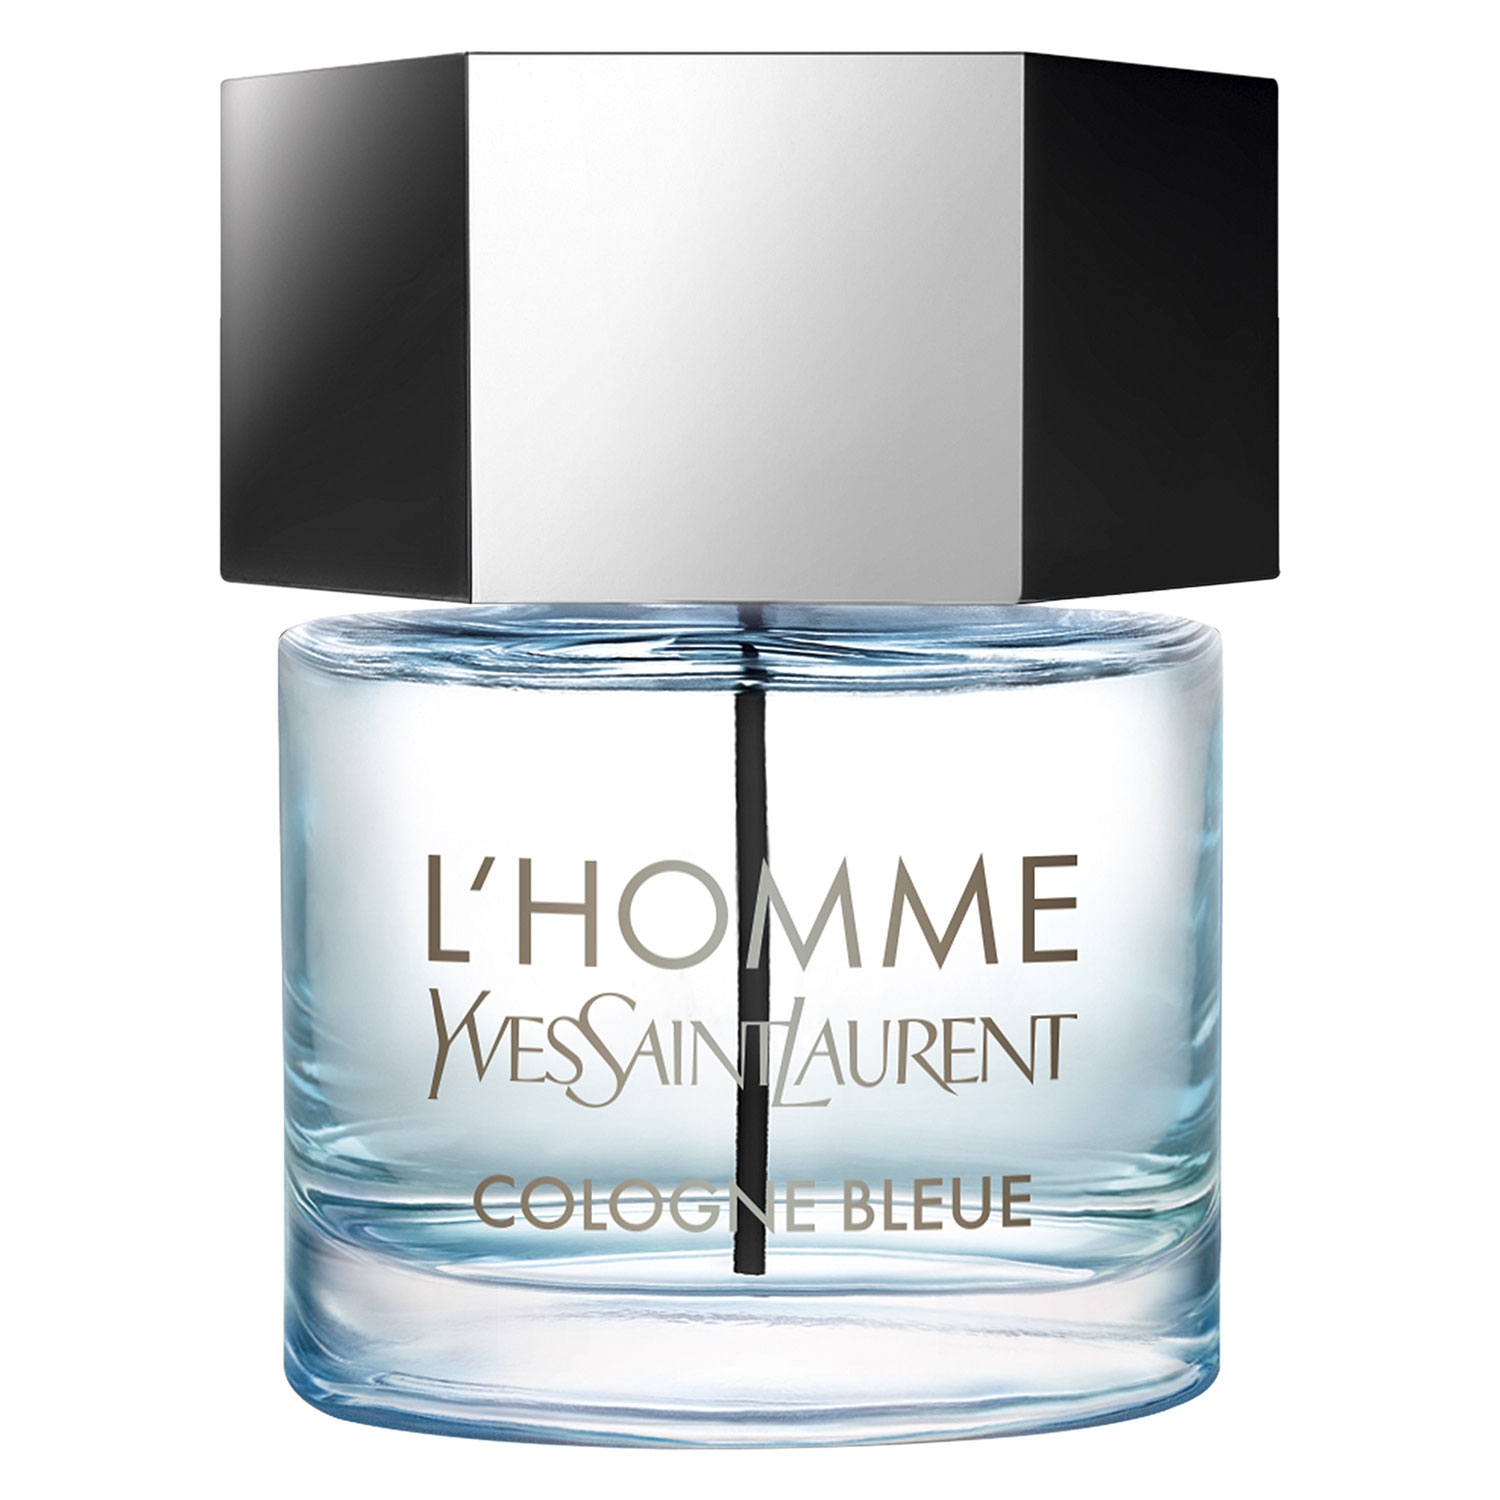 Product image from L'Homme - Cologne Bleue